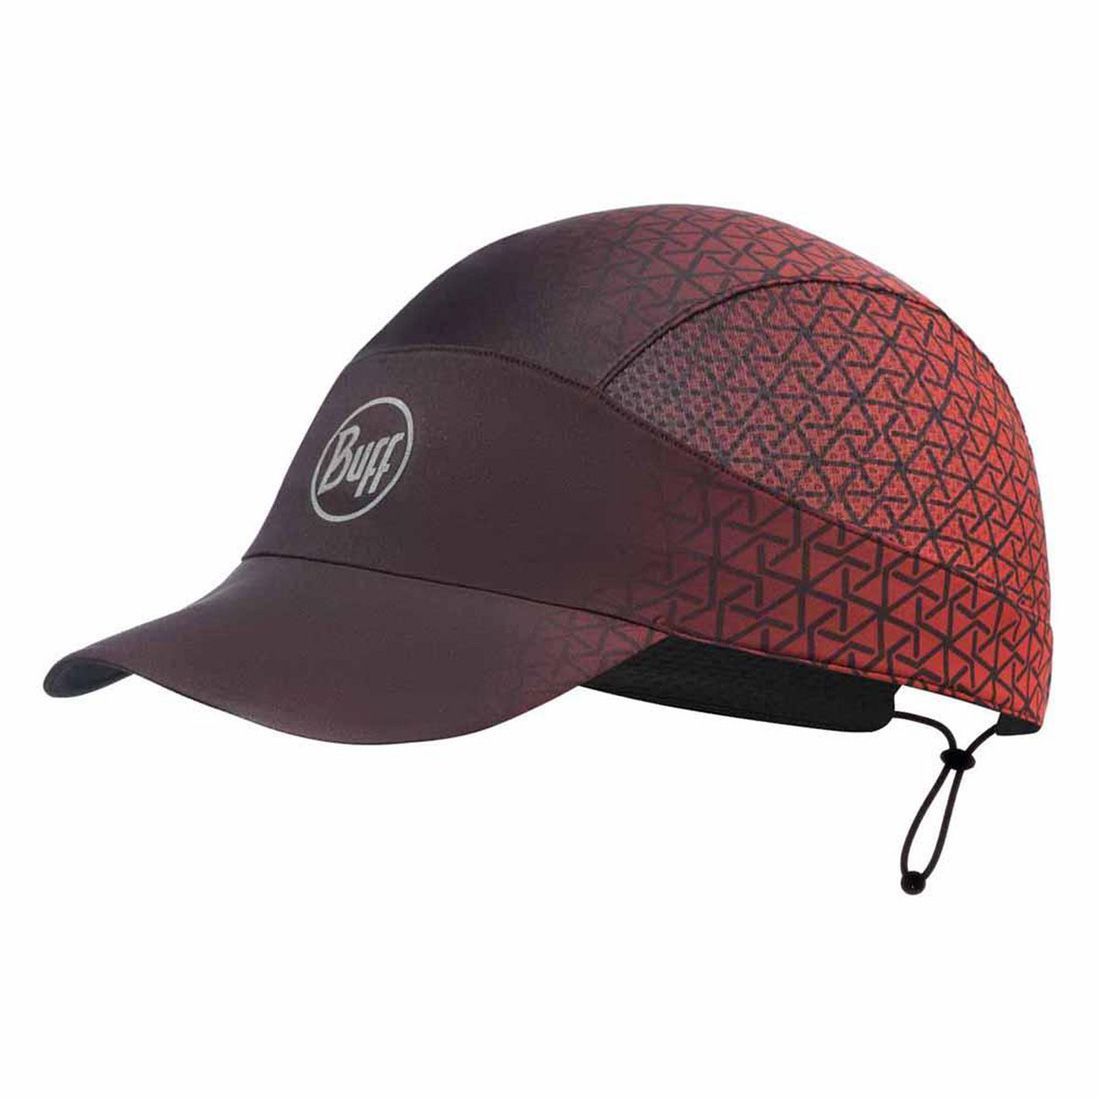 PACK RUN CAP R-EQUILATERAL